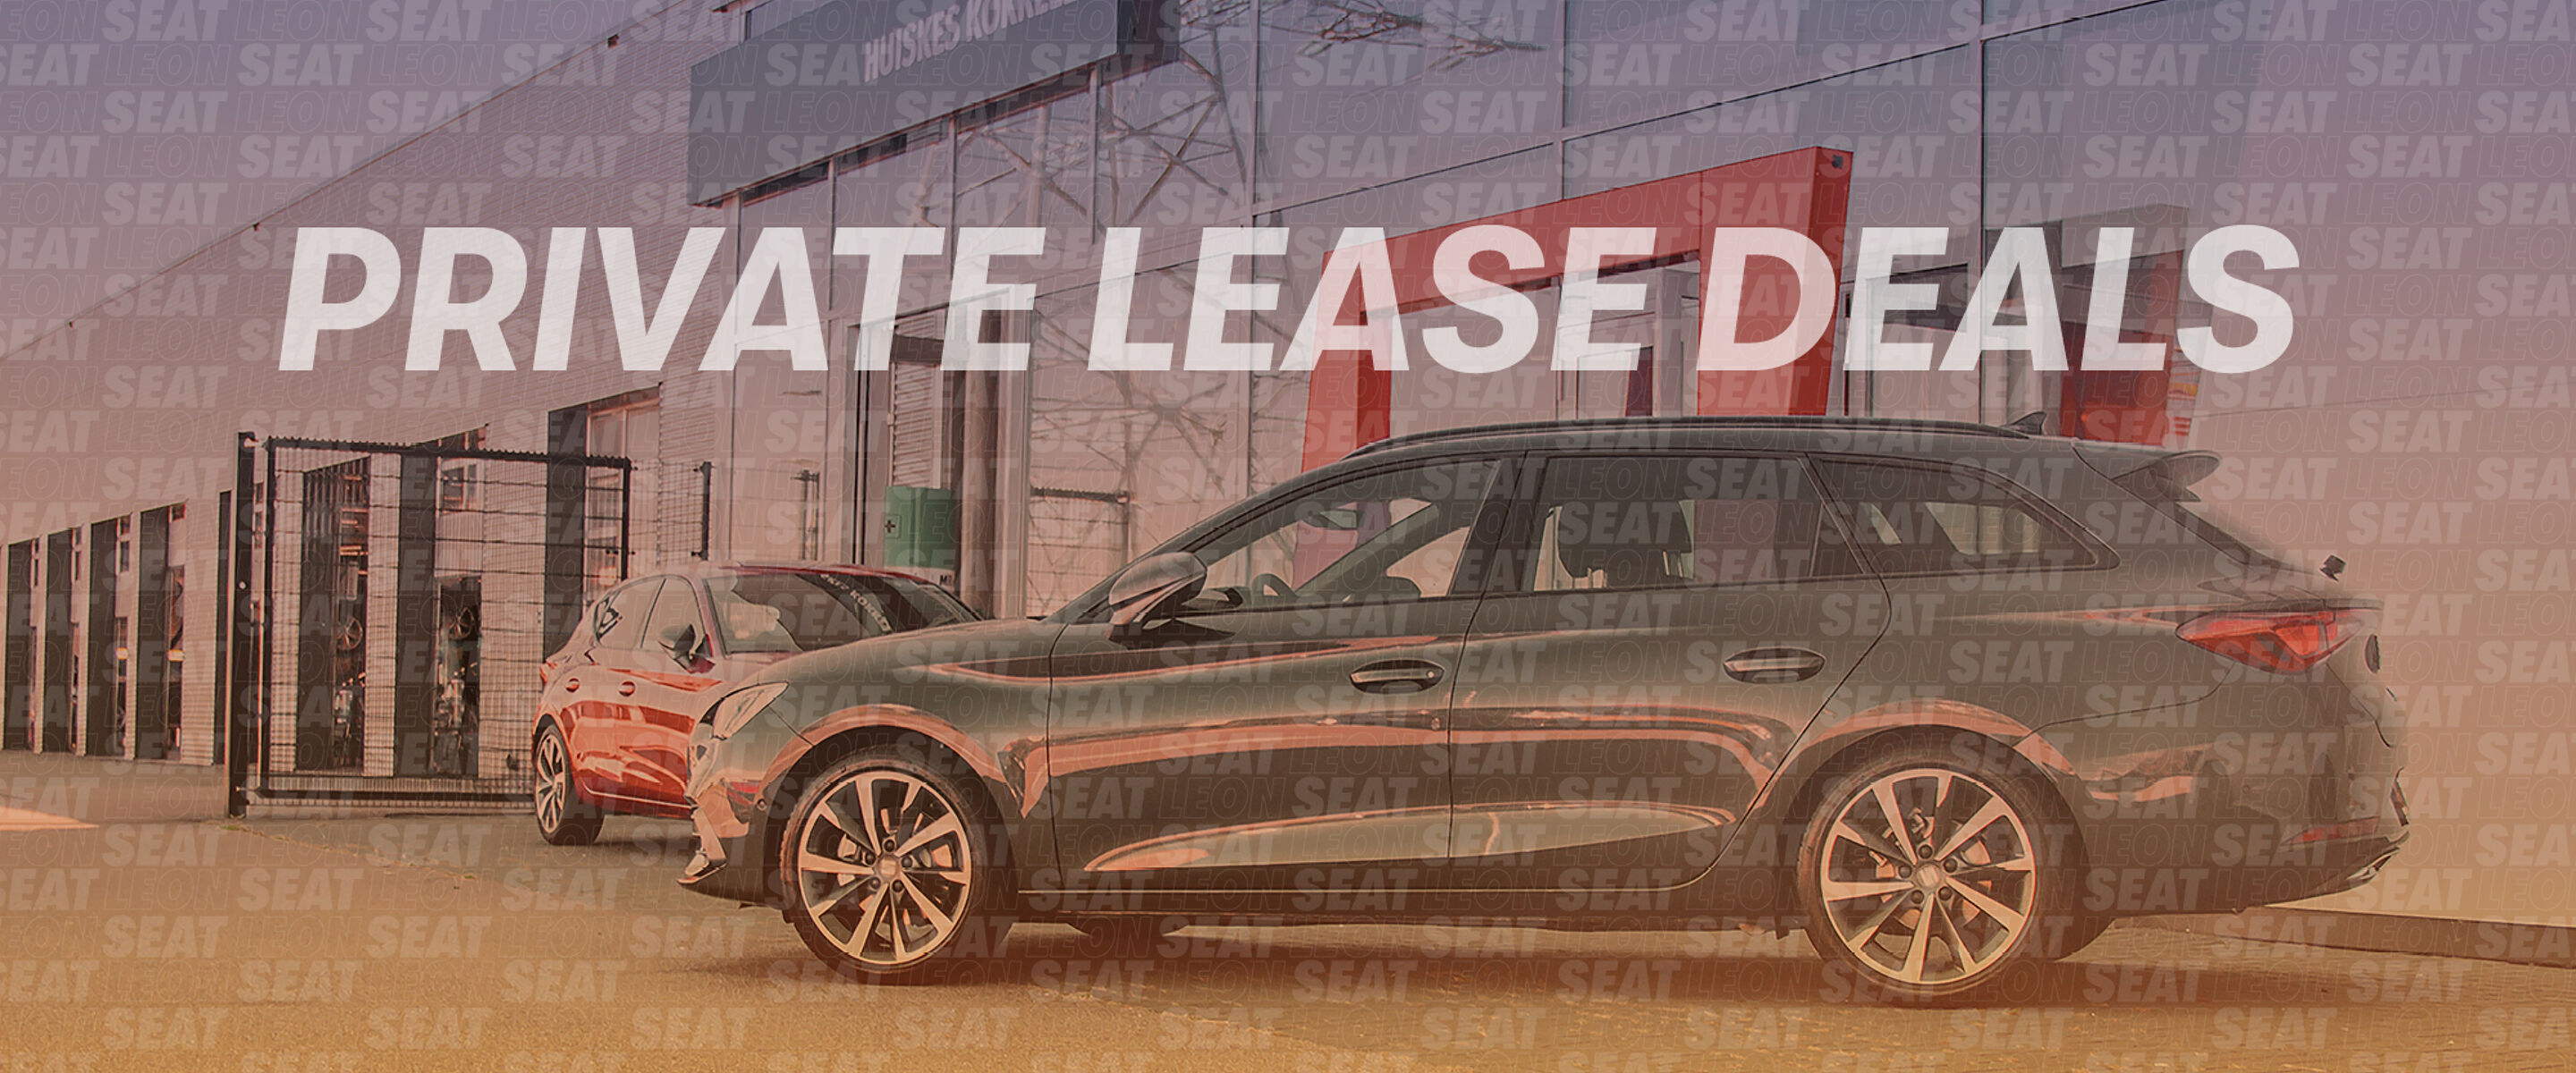 SEAT Private Lease deals